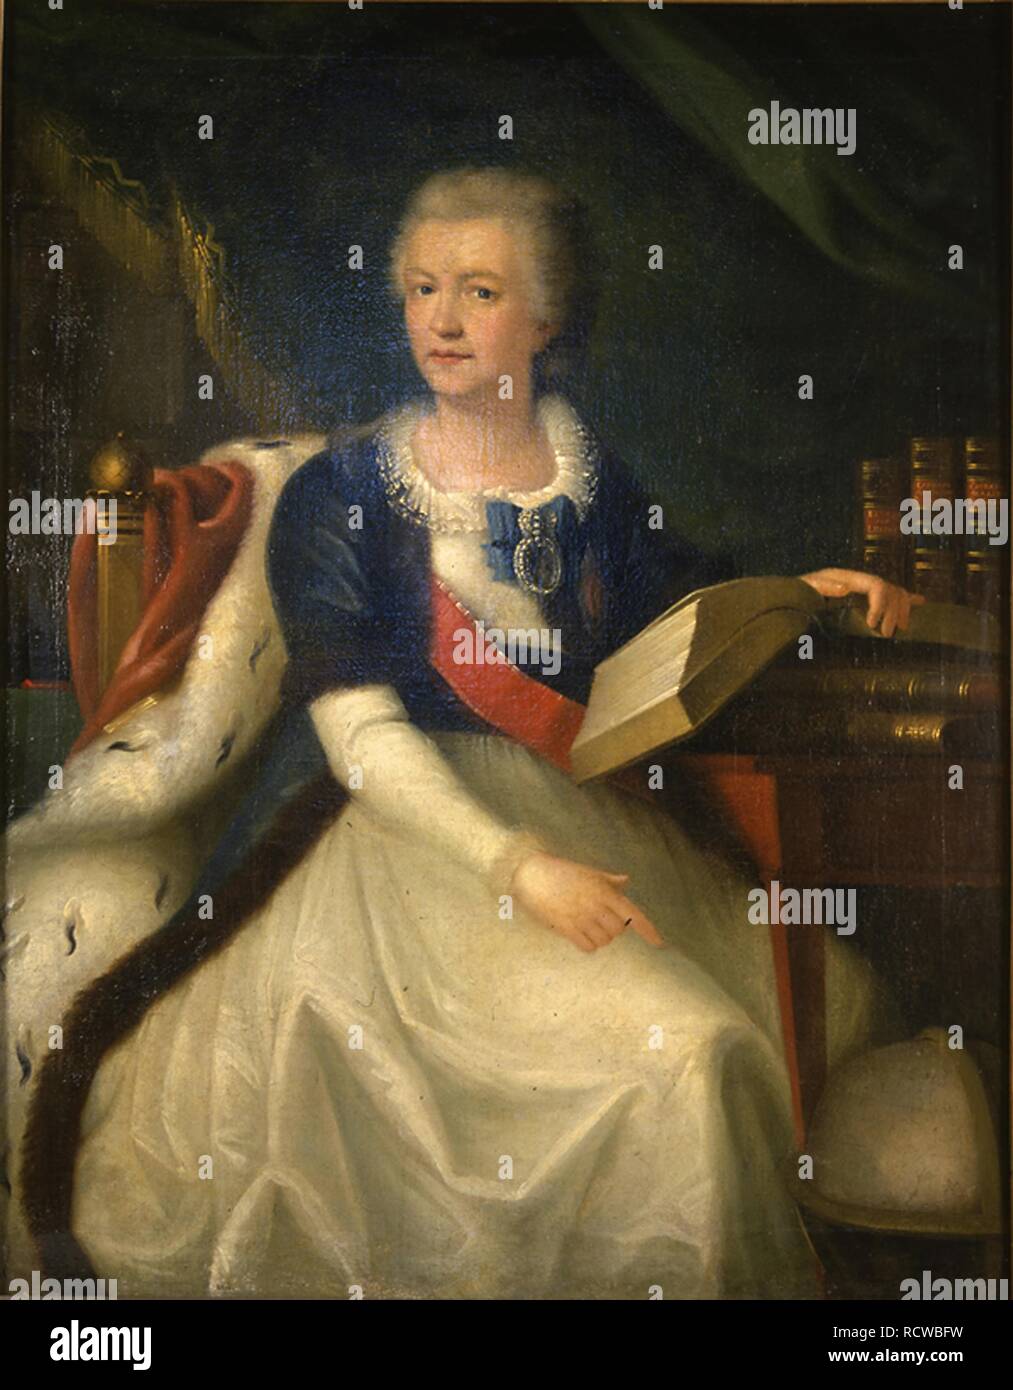 Portrait of the Princess Yekaterina R. Vorontsova-Dashkova (1744-1810), the first  President of the Russian Academy of Sciences. Museum: State History Museum, Moscow. Author: ANONYMOUS. Stock Photo